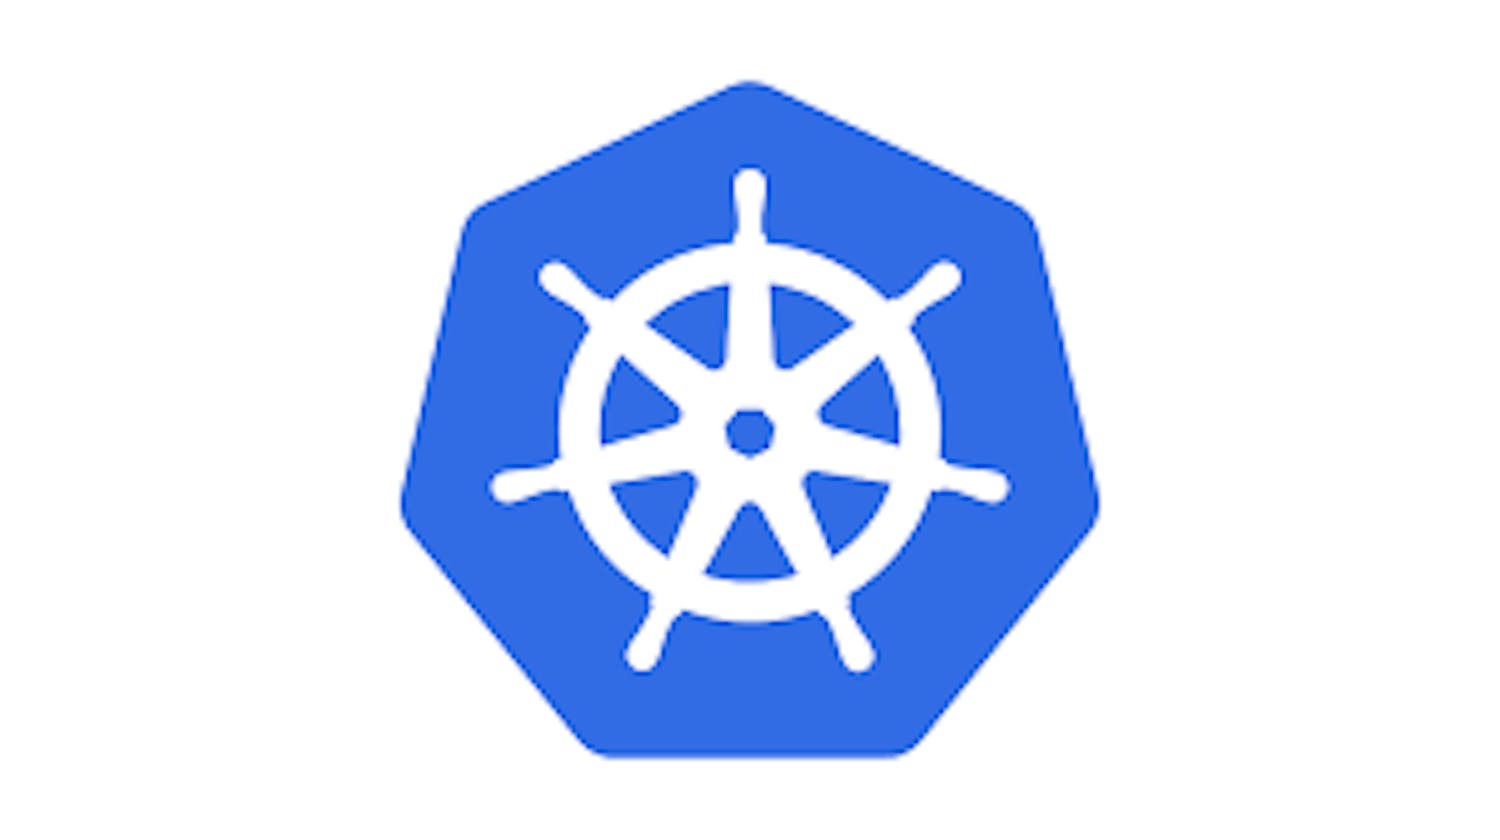 Kubernetes: The Container Orchestration Platform